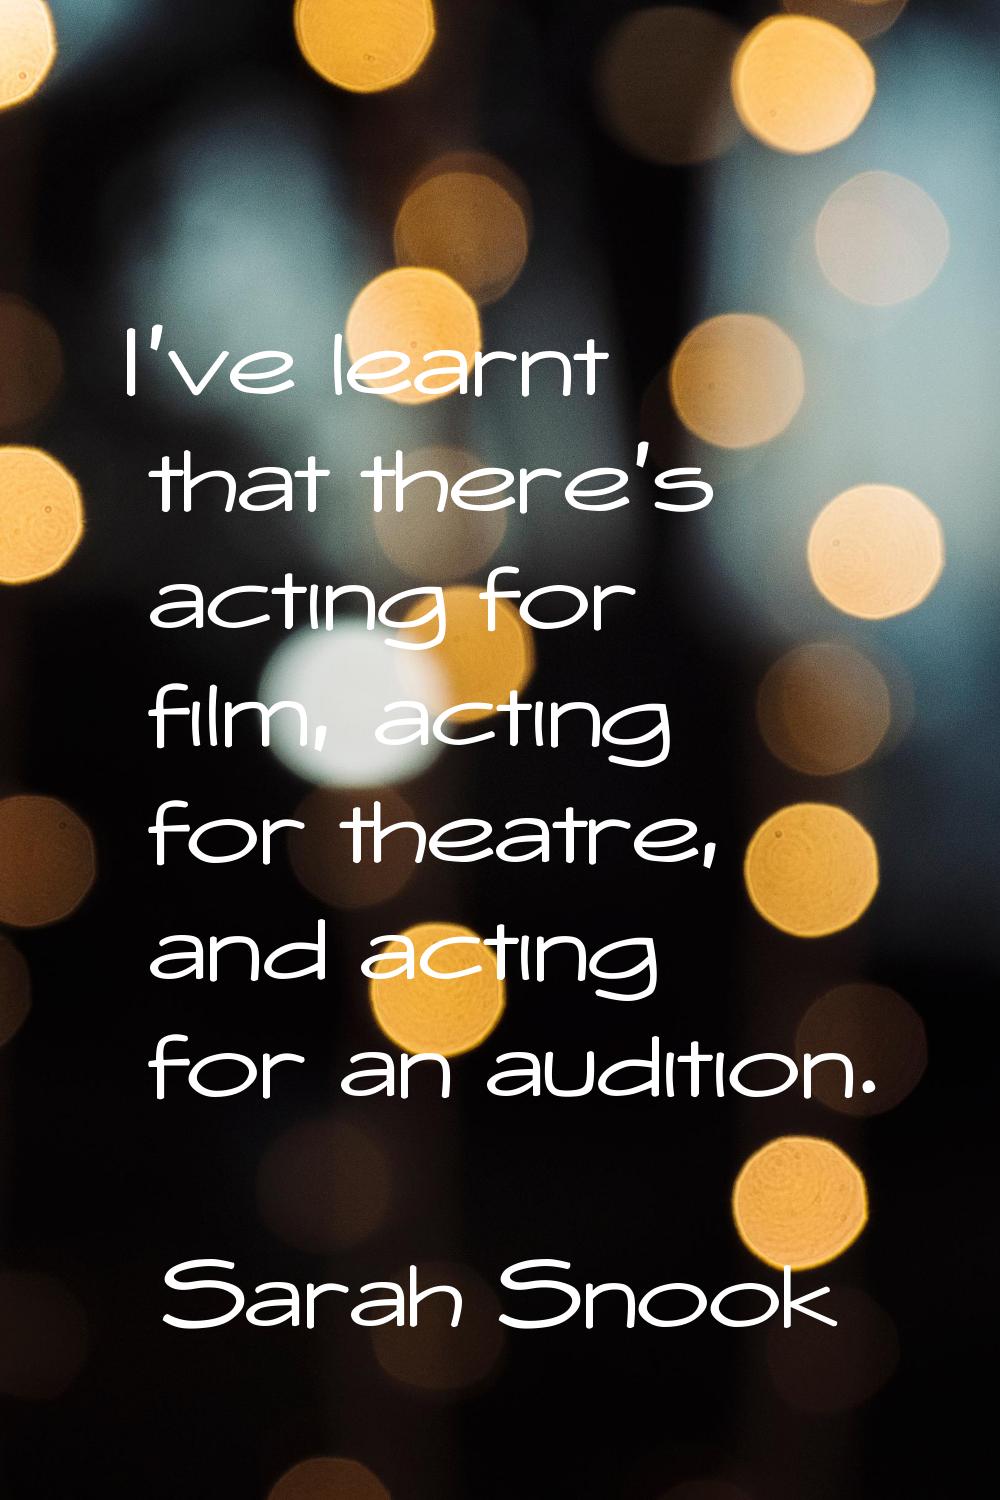 I've learnt that there's acting for film, acting for theatre, and acting for an audition.